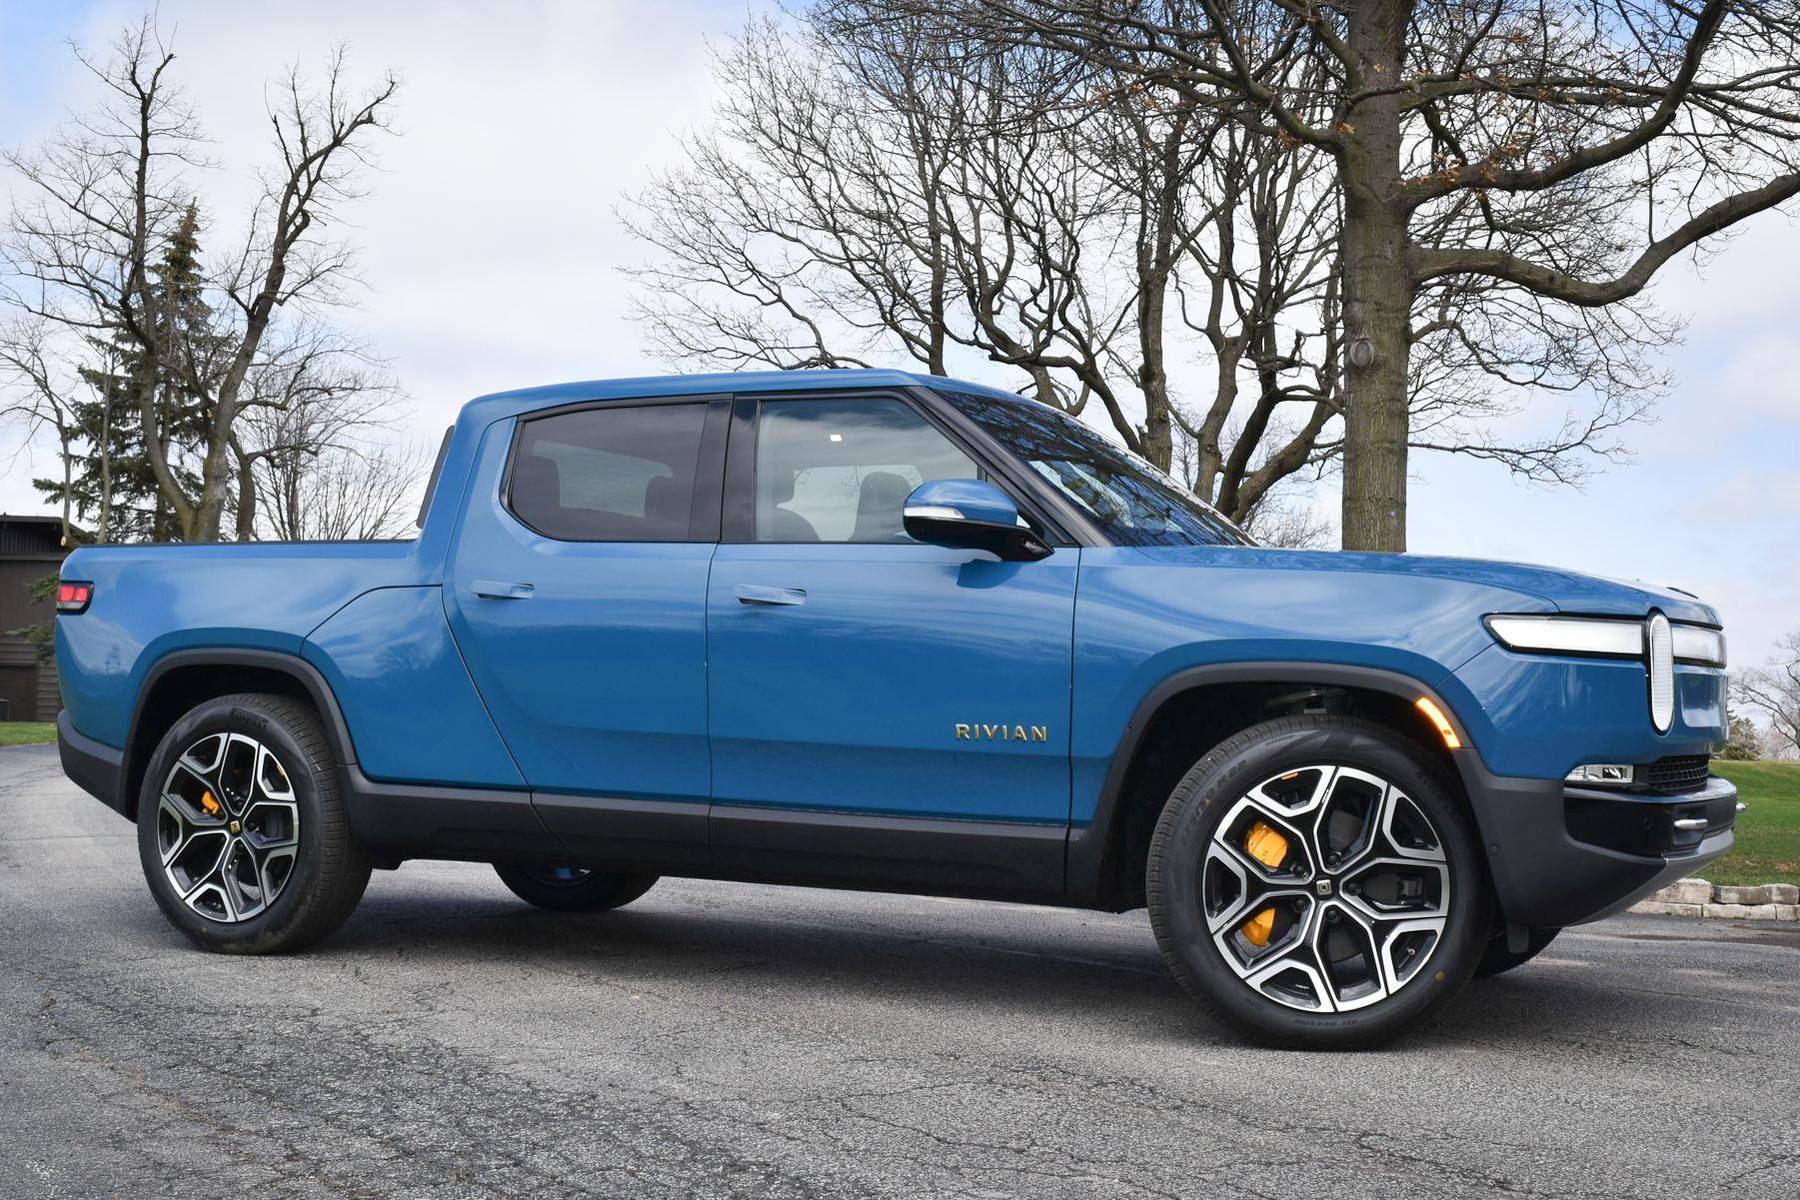 The Rivian R1T is the first fully electric pick up truck to be offered on the market